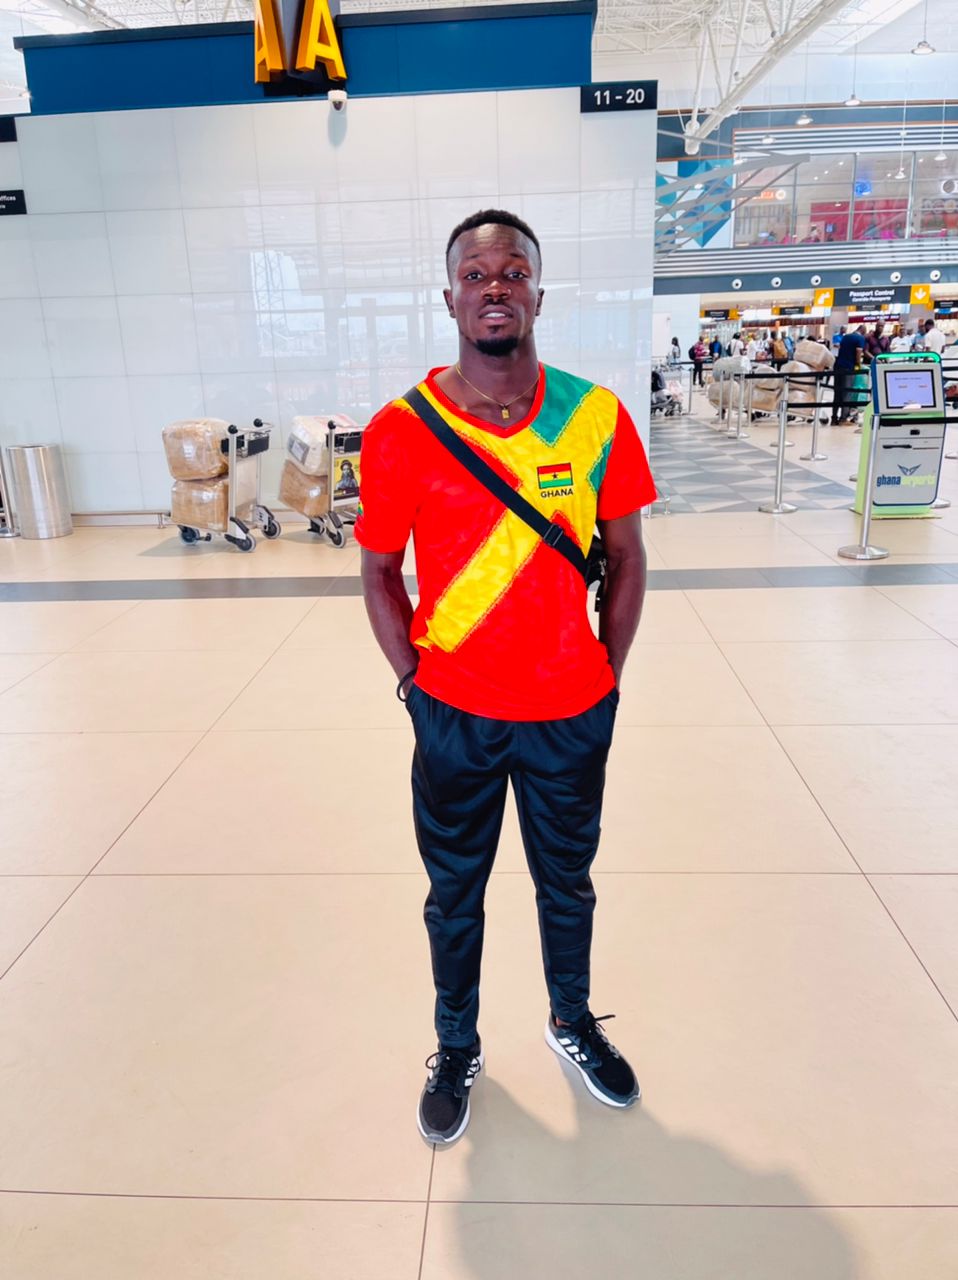 UDS' Athlete Selected to Represent Ghana at 2022 Commonwealth Games